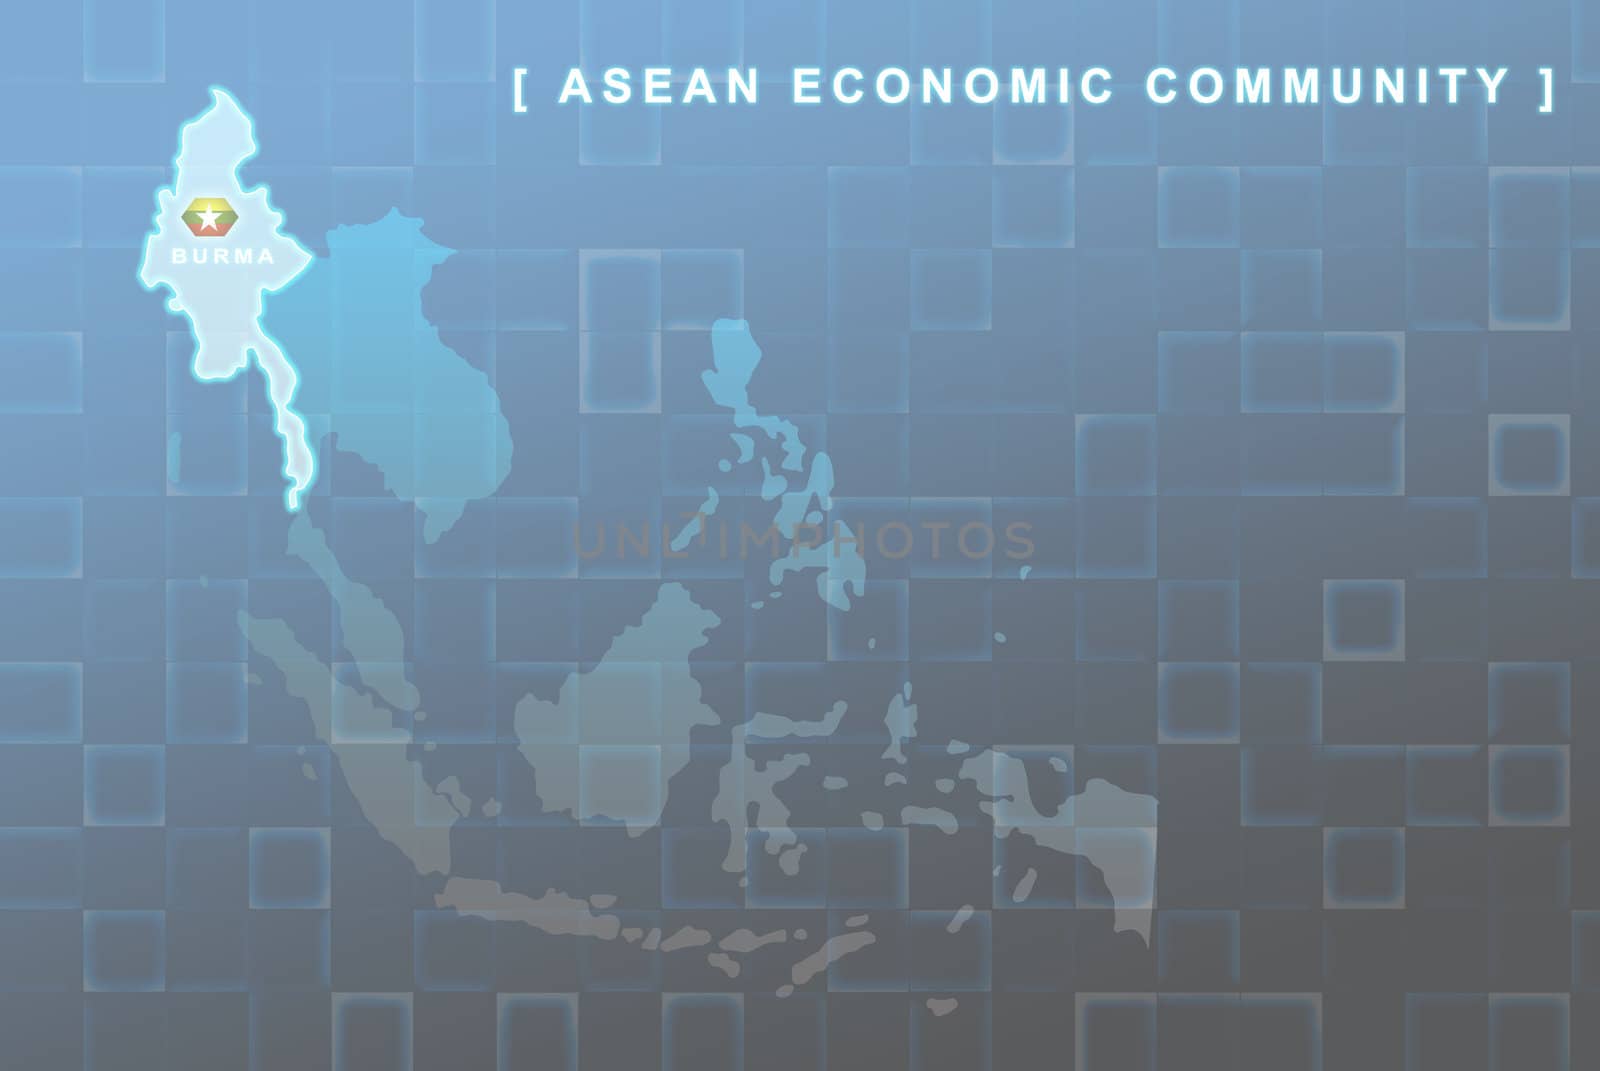 Modern map of South East Asia countries that will be member of AEC with Burma flag symbol in background